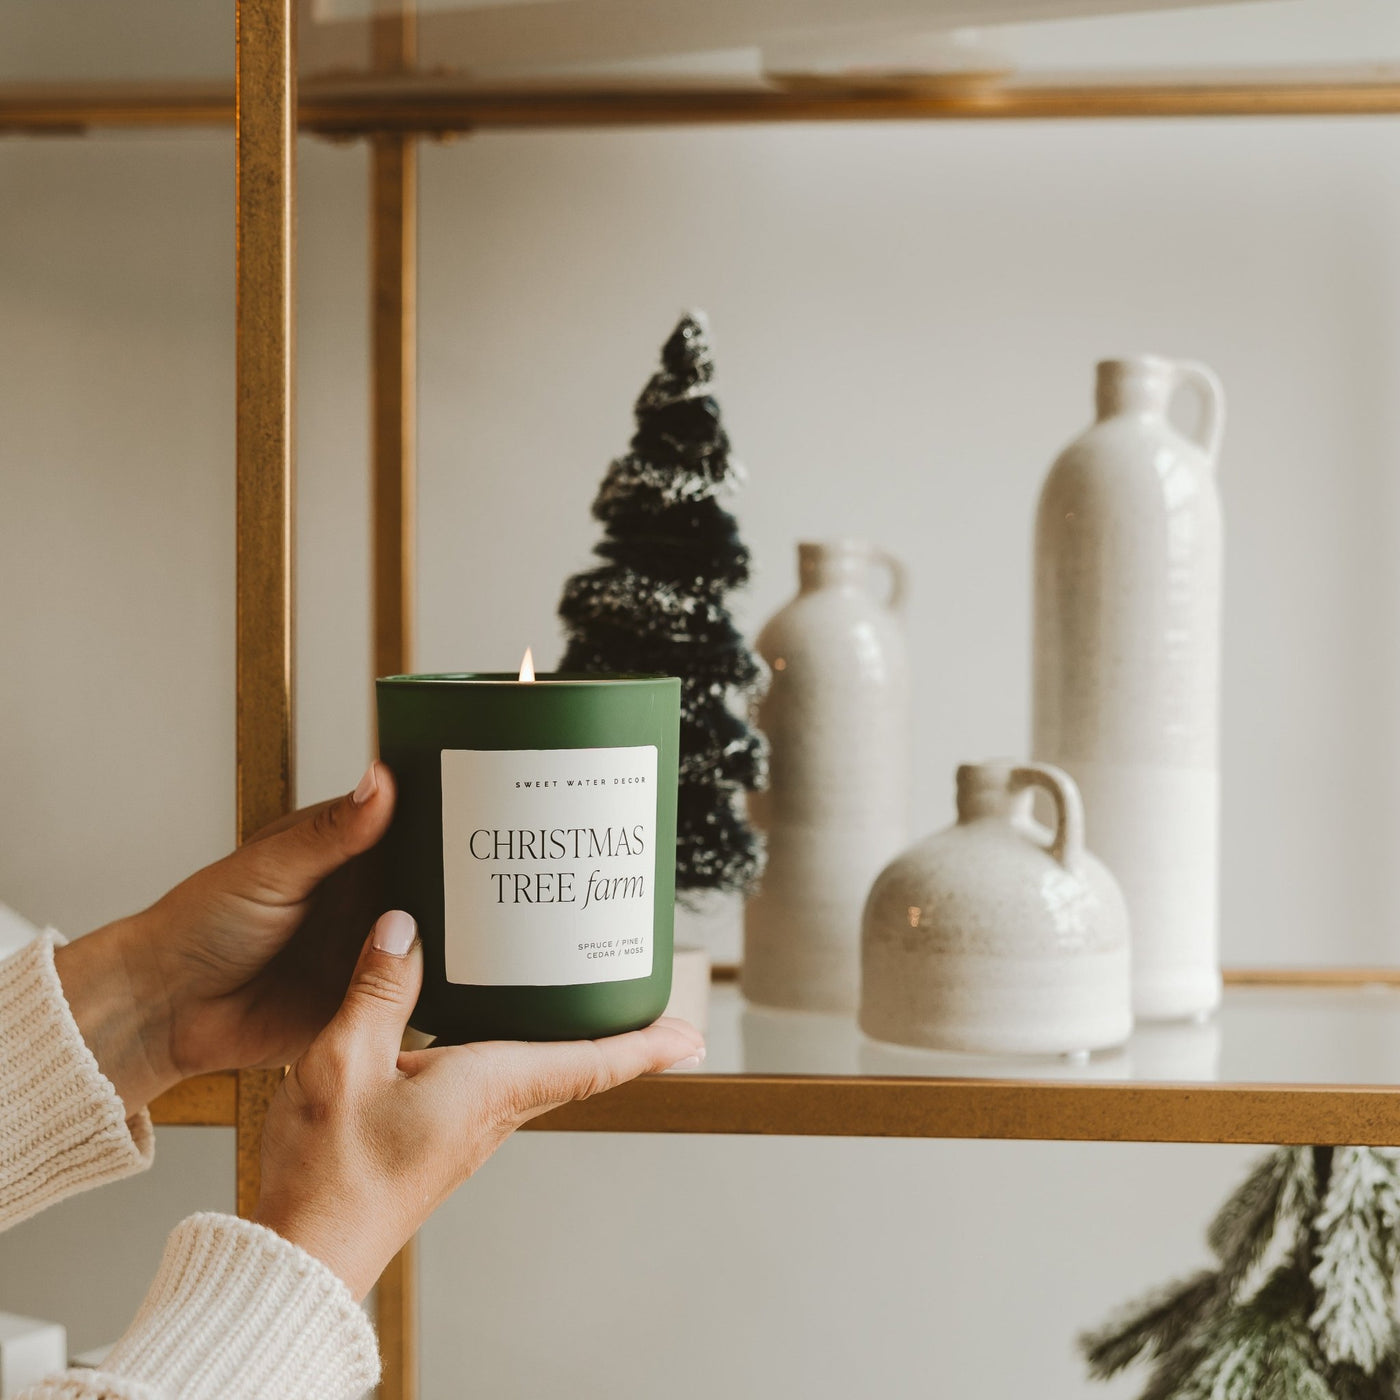 Christmas Tree Farm Soy Candle - Green Matte Jar - 15 oz - Sweet Water Decor - Candles